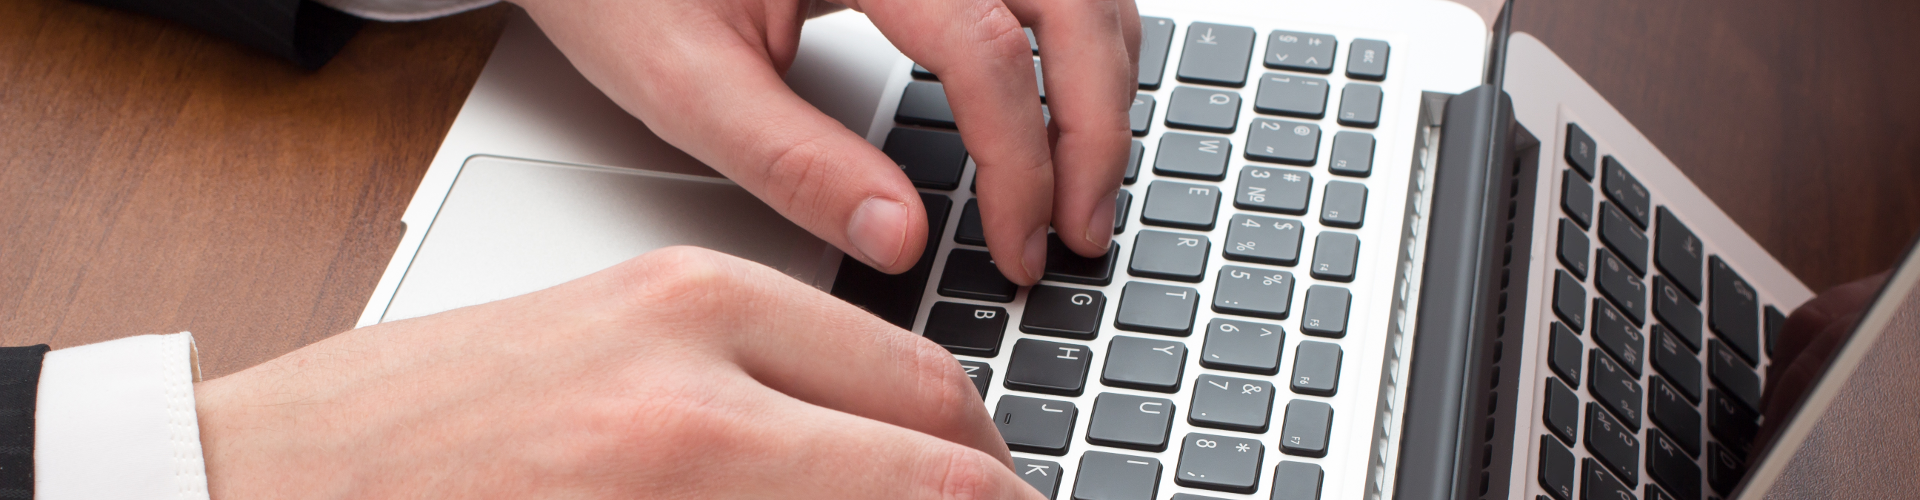 A person is typing on a laptop computer keyboard